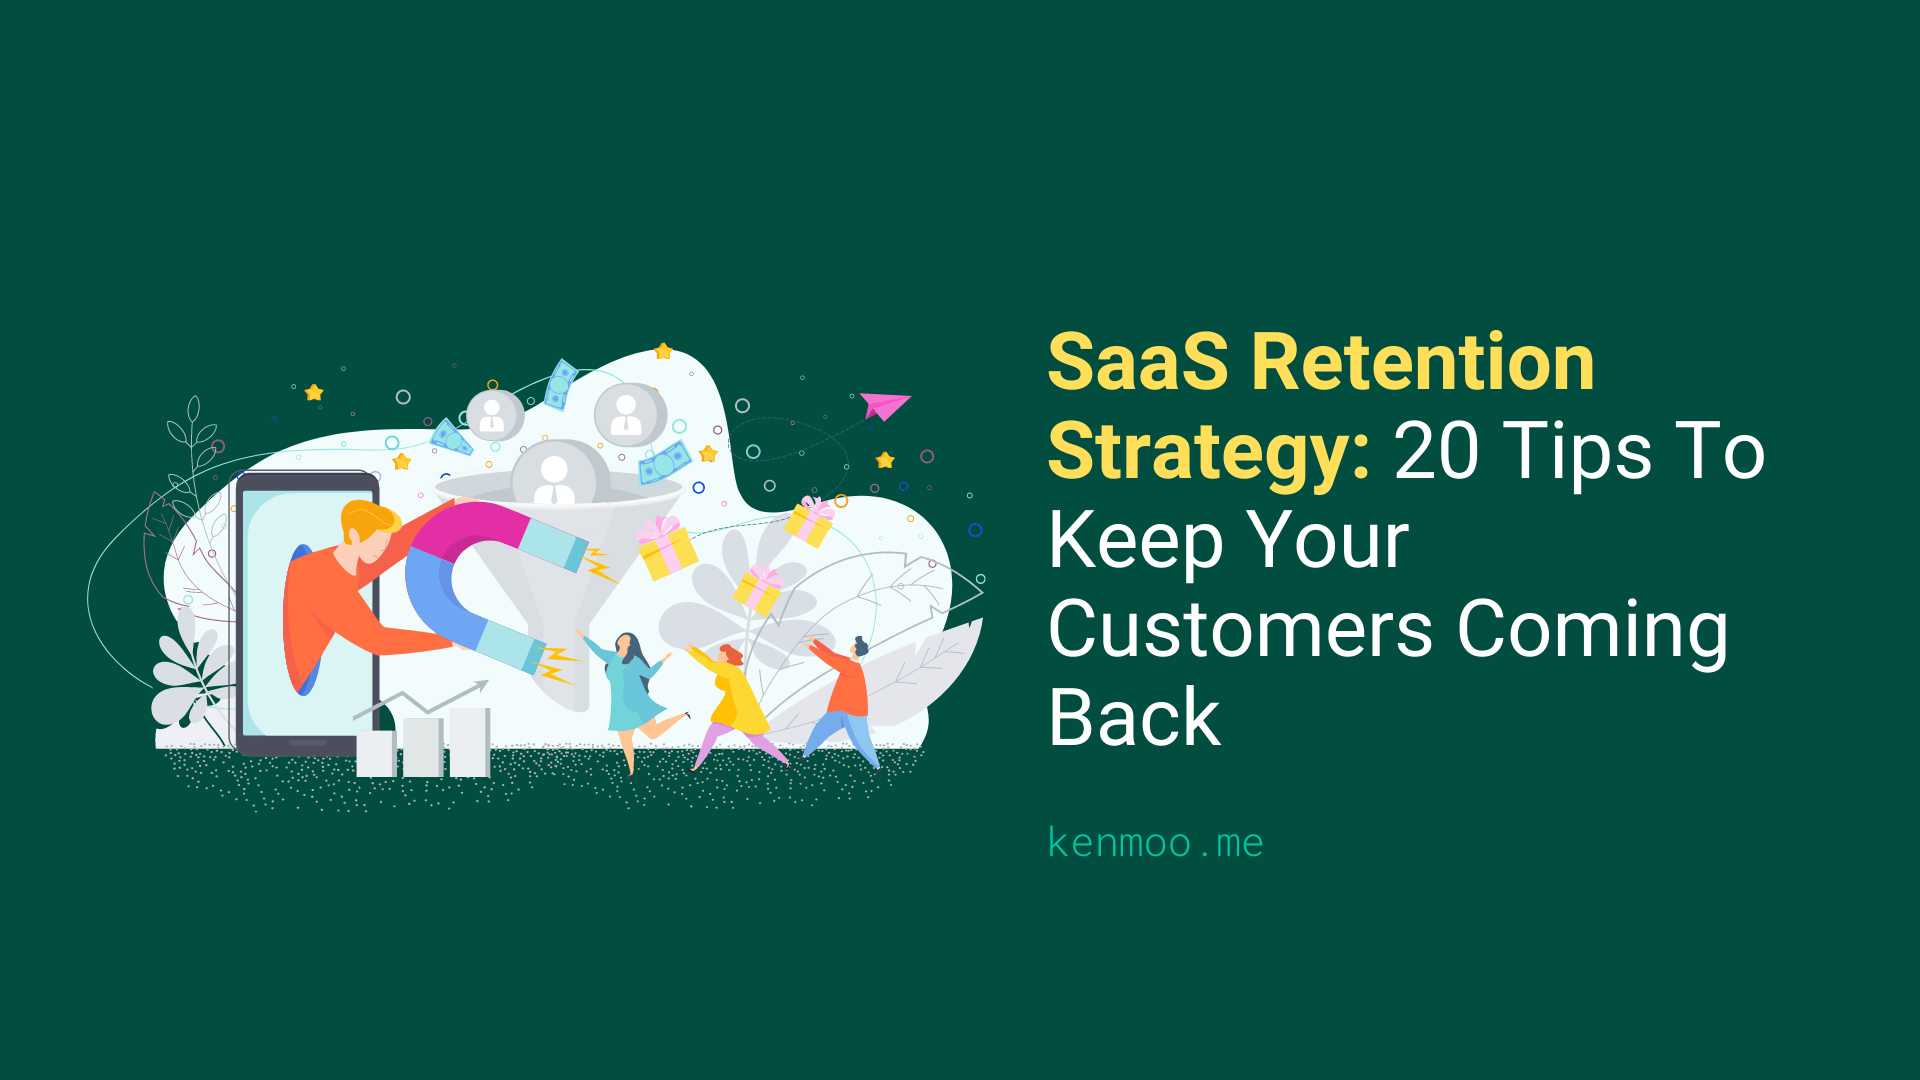 SaaS Retention Strategy: 20 Tips To Keep Your Customers Coming Back